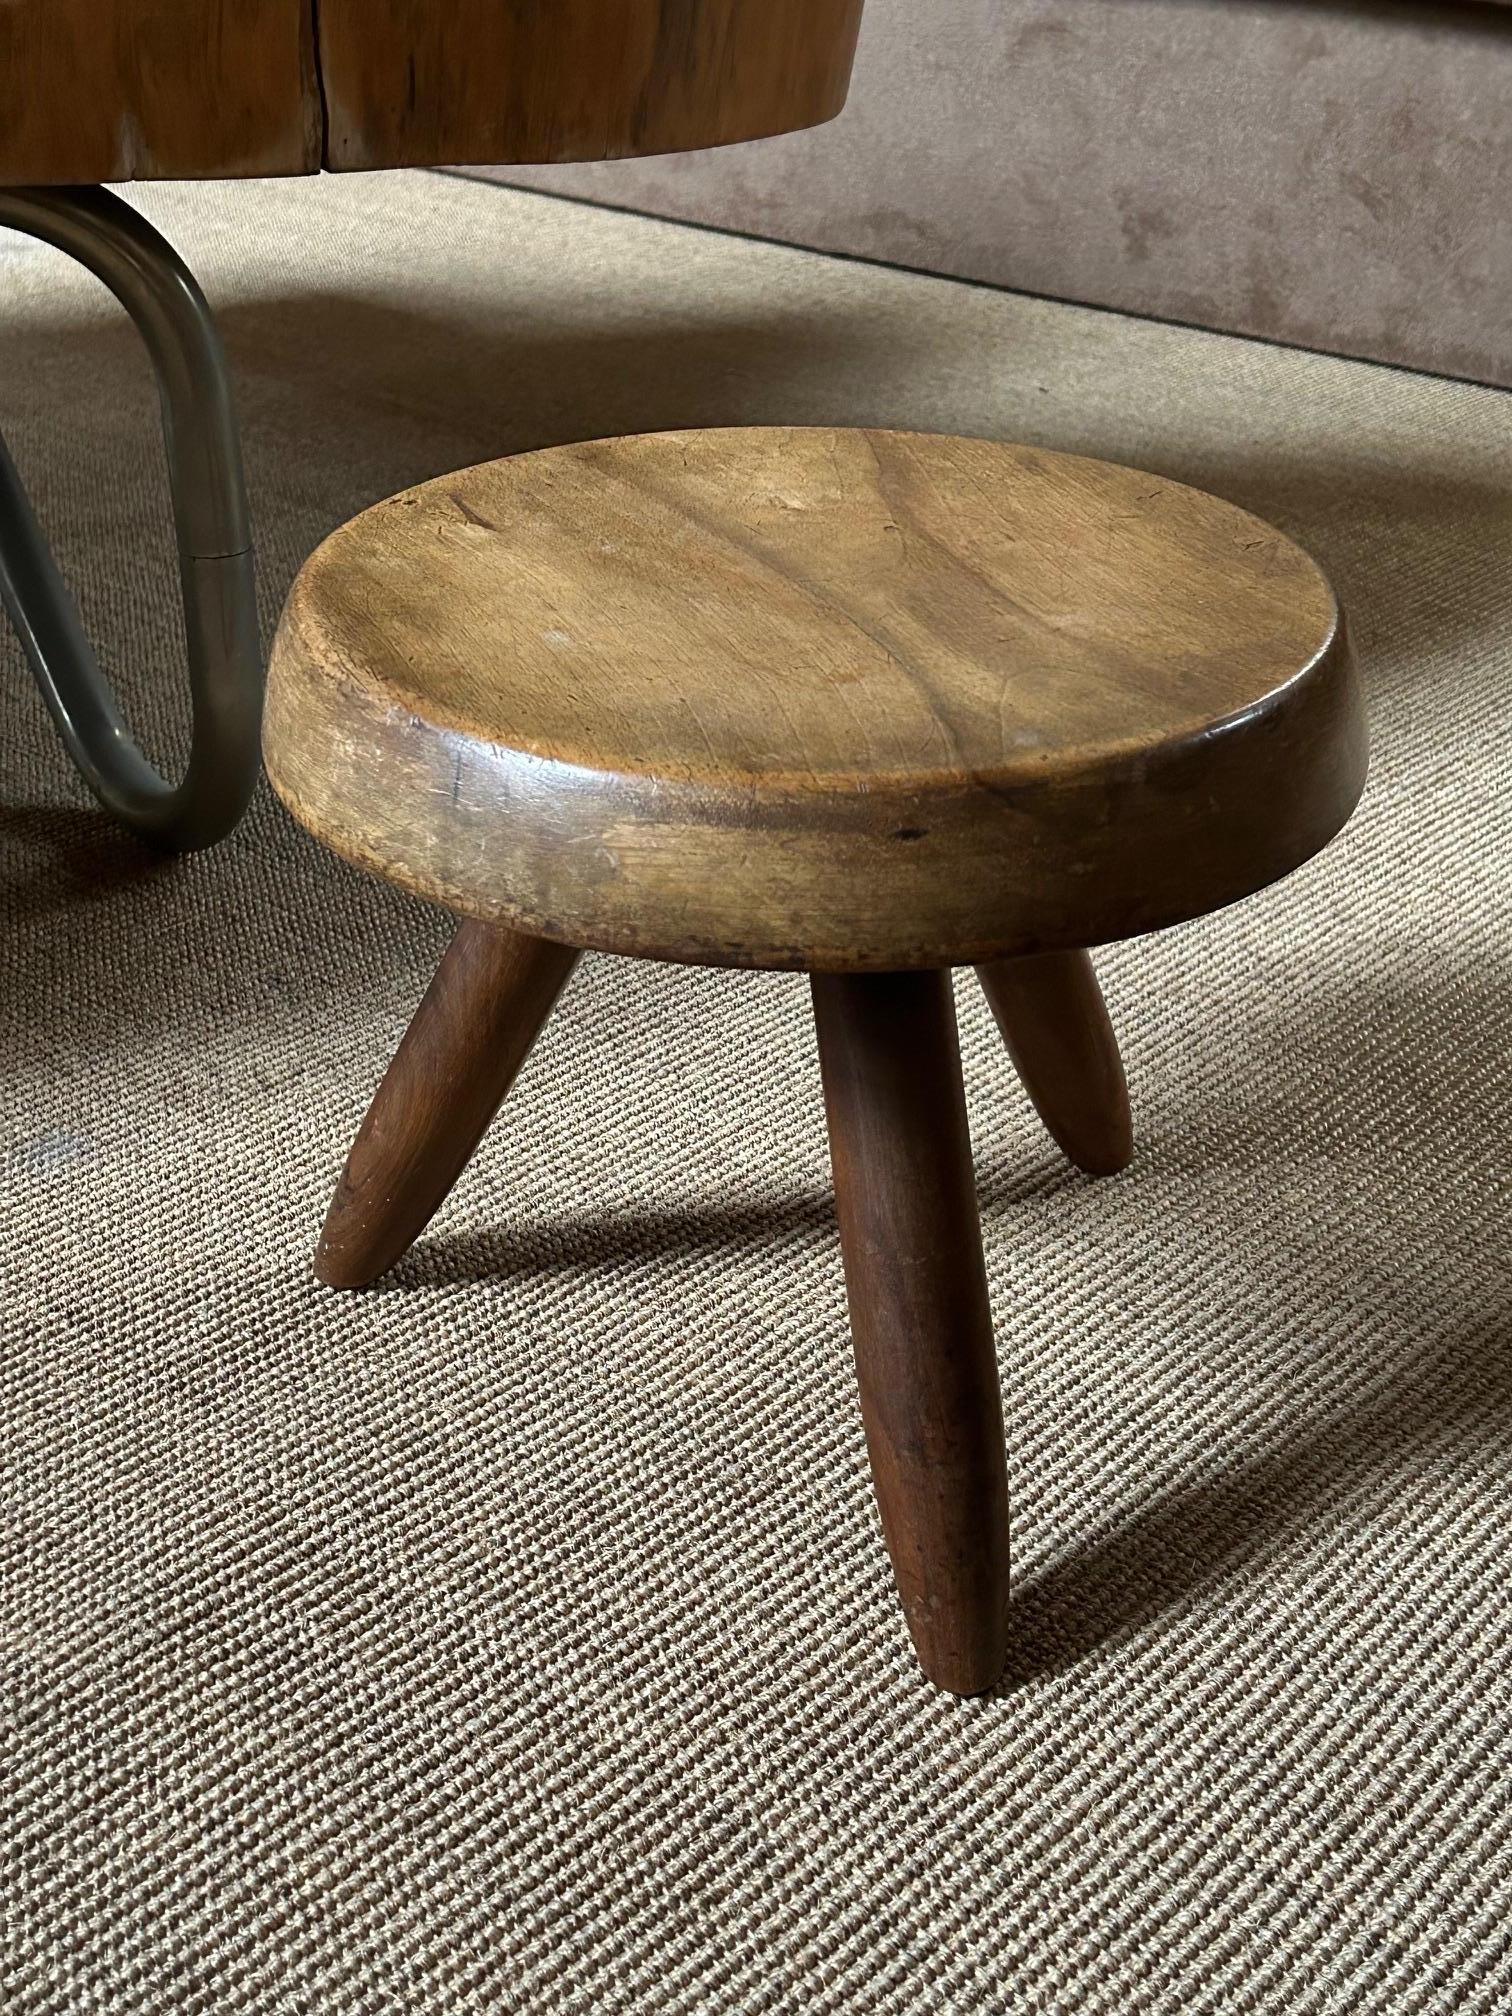 Mahogany Berger stool by Charlotte Perriand For Sale 1